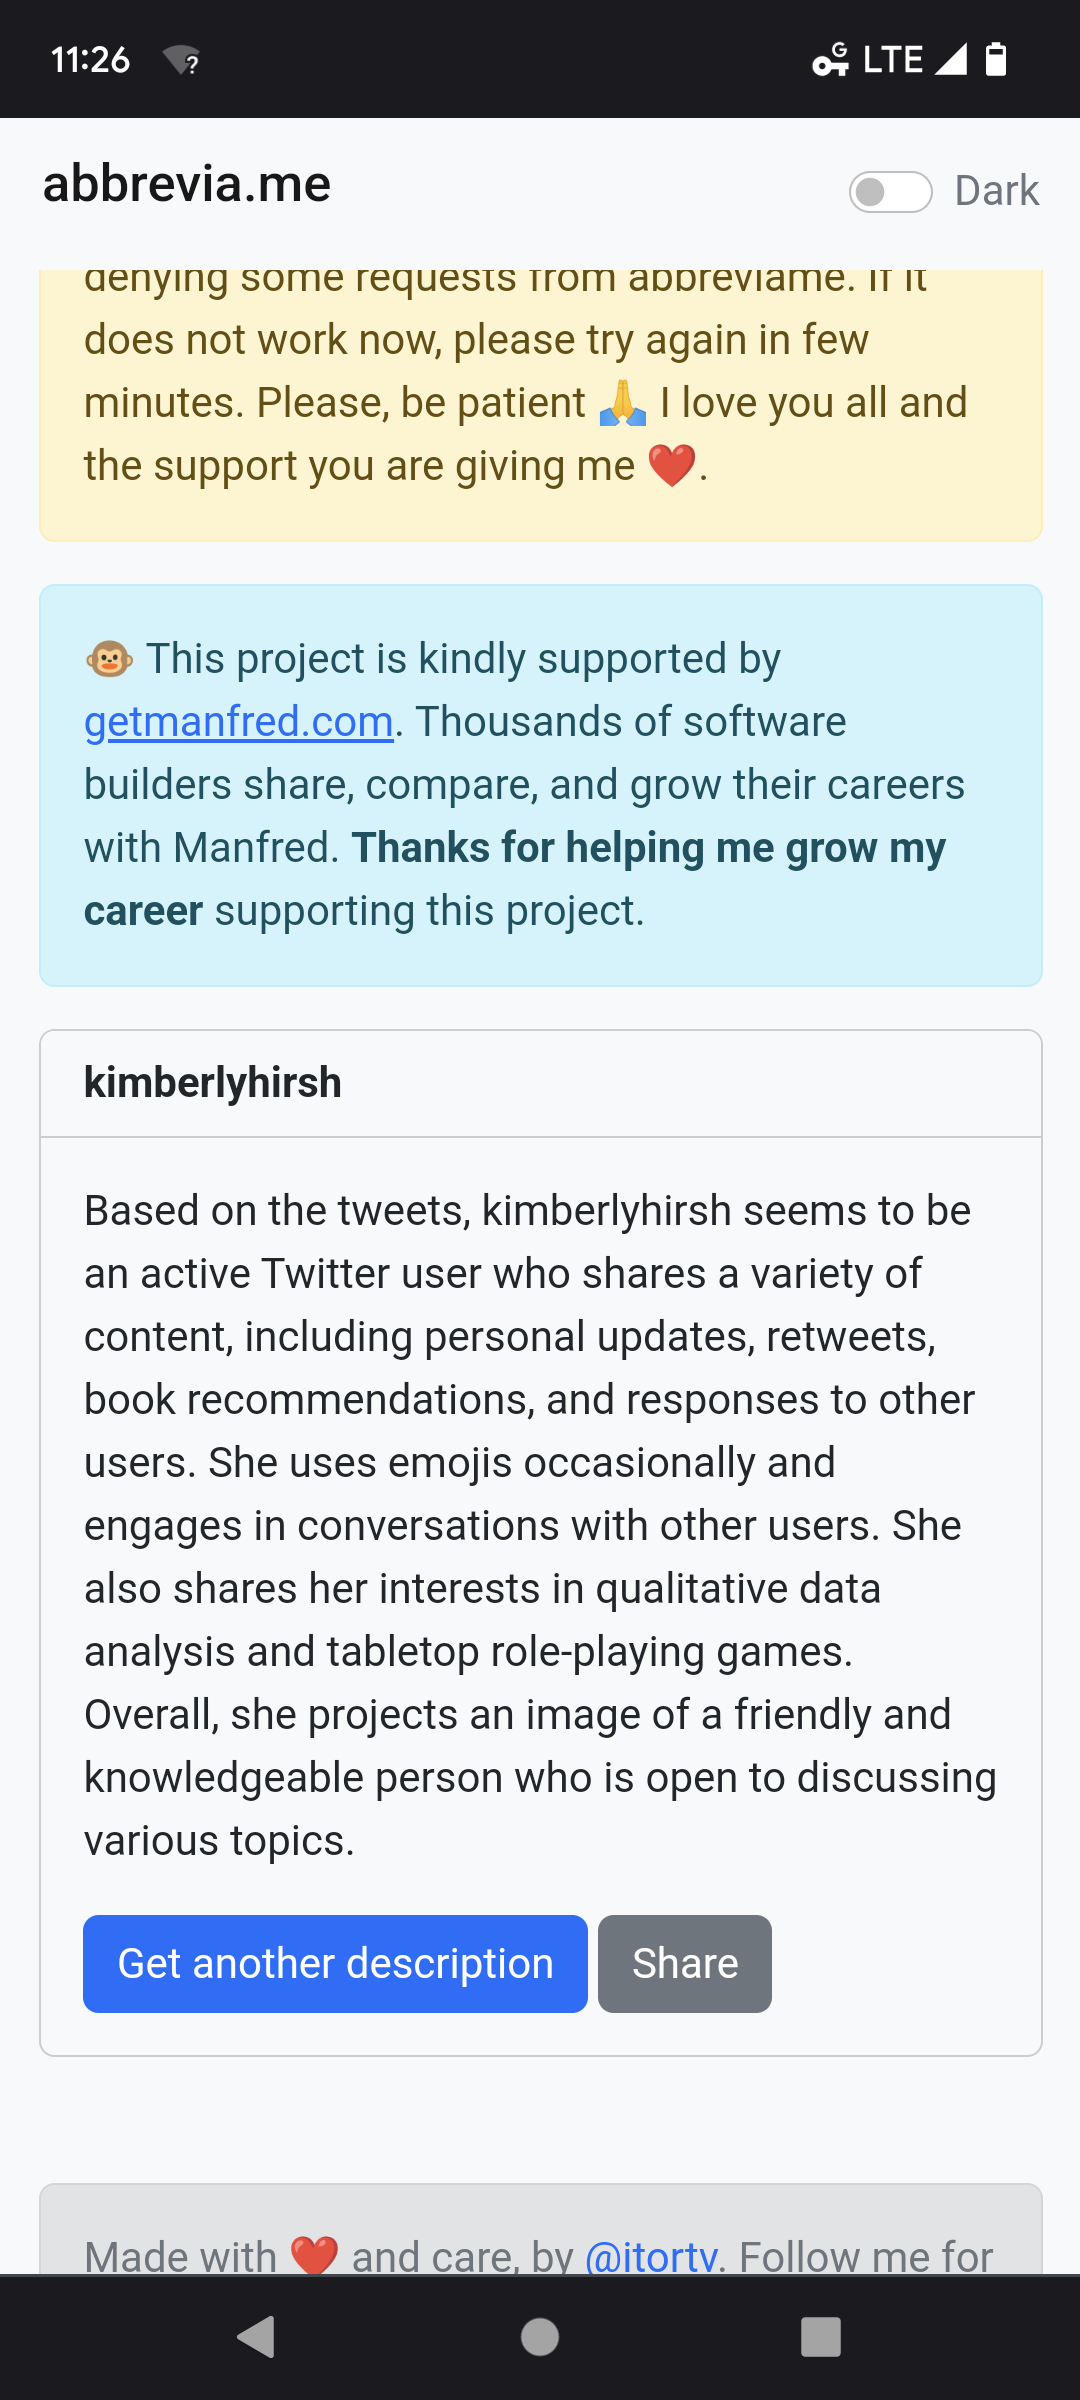 Abbrevia.me summary: Based on the tweets, kimberlyhirsh seems to be an active Twitter user who shares a variety of content, including personal updates, retweets, book recommendations, and responses to other users. She uses emojis occasionally and engages in conversations with other users. She also shares her interests in qualitative data analysis and tabletop role-playing games. Overall, she projects an image of a friendly and knowledgeable person who is open to discussing various topics.